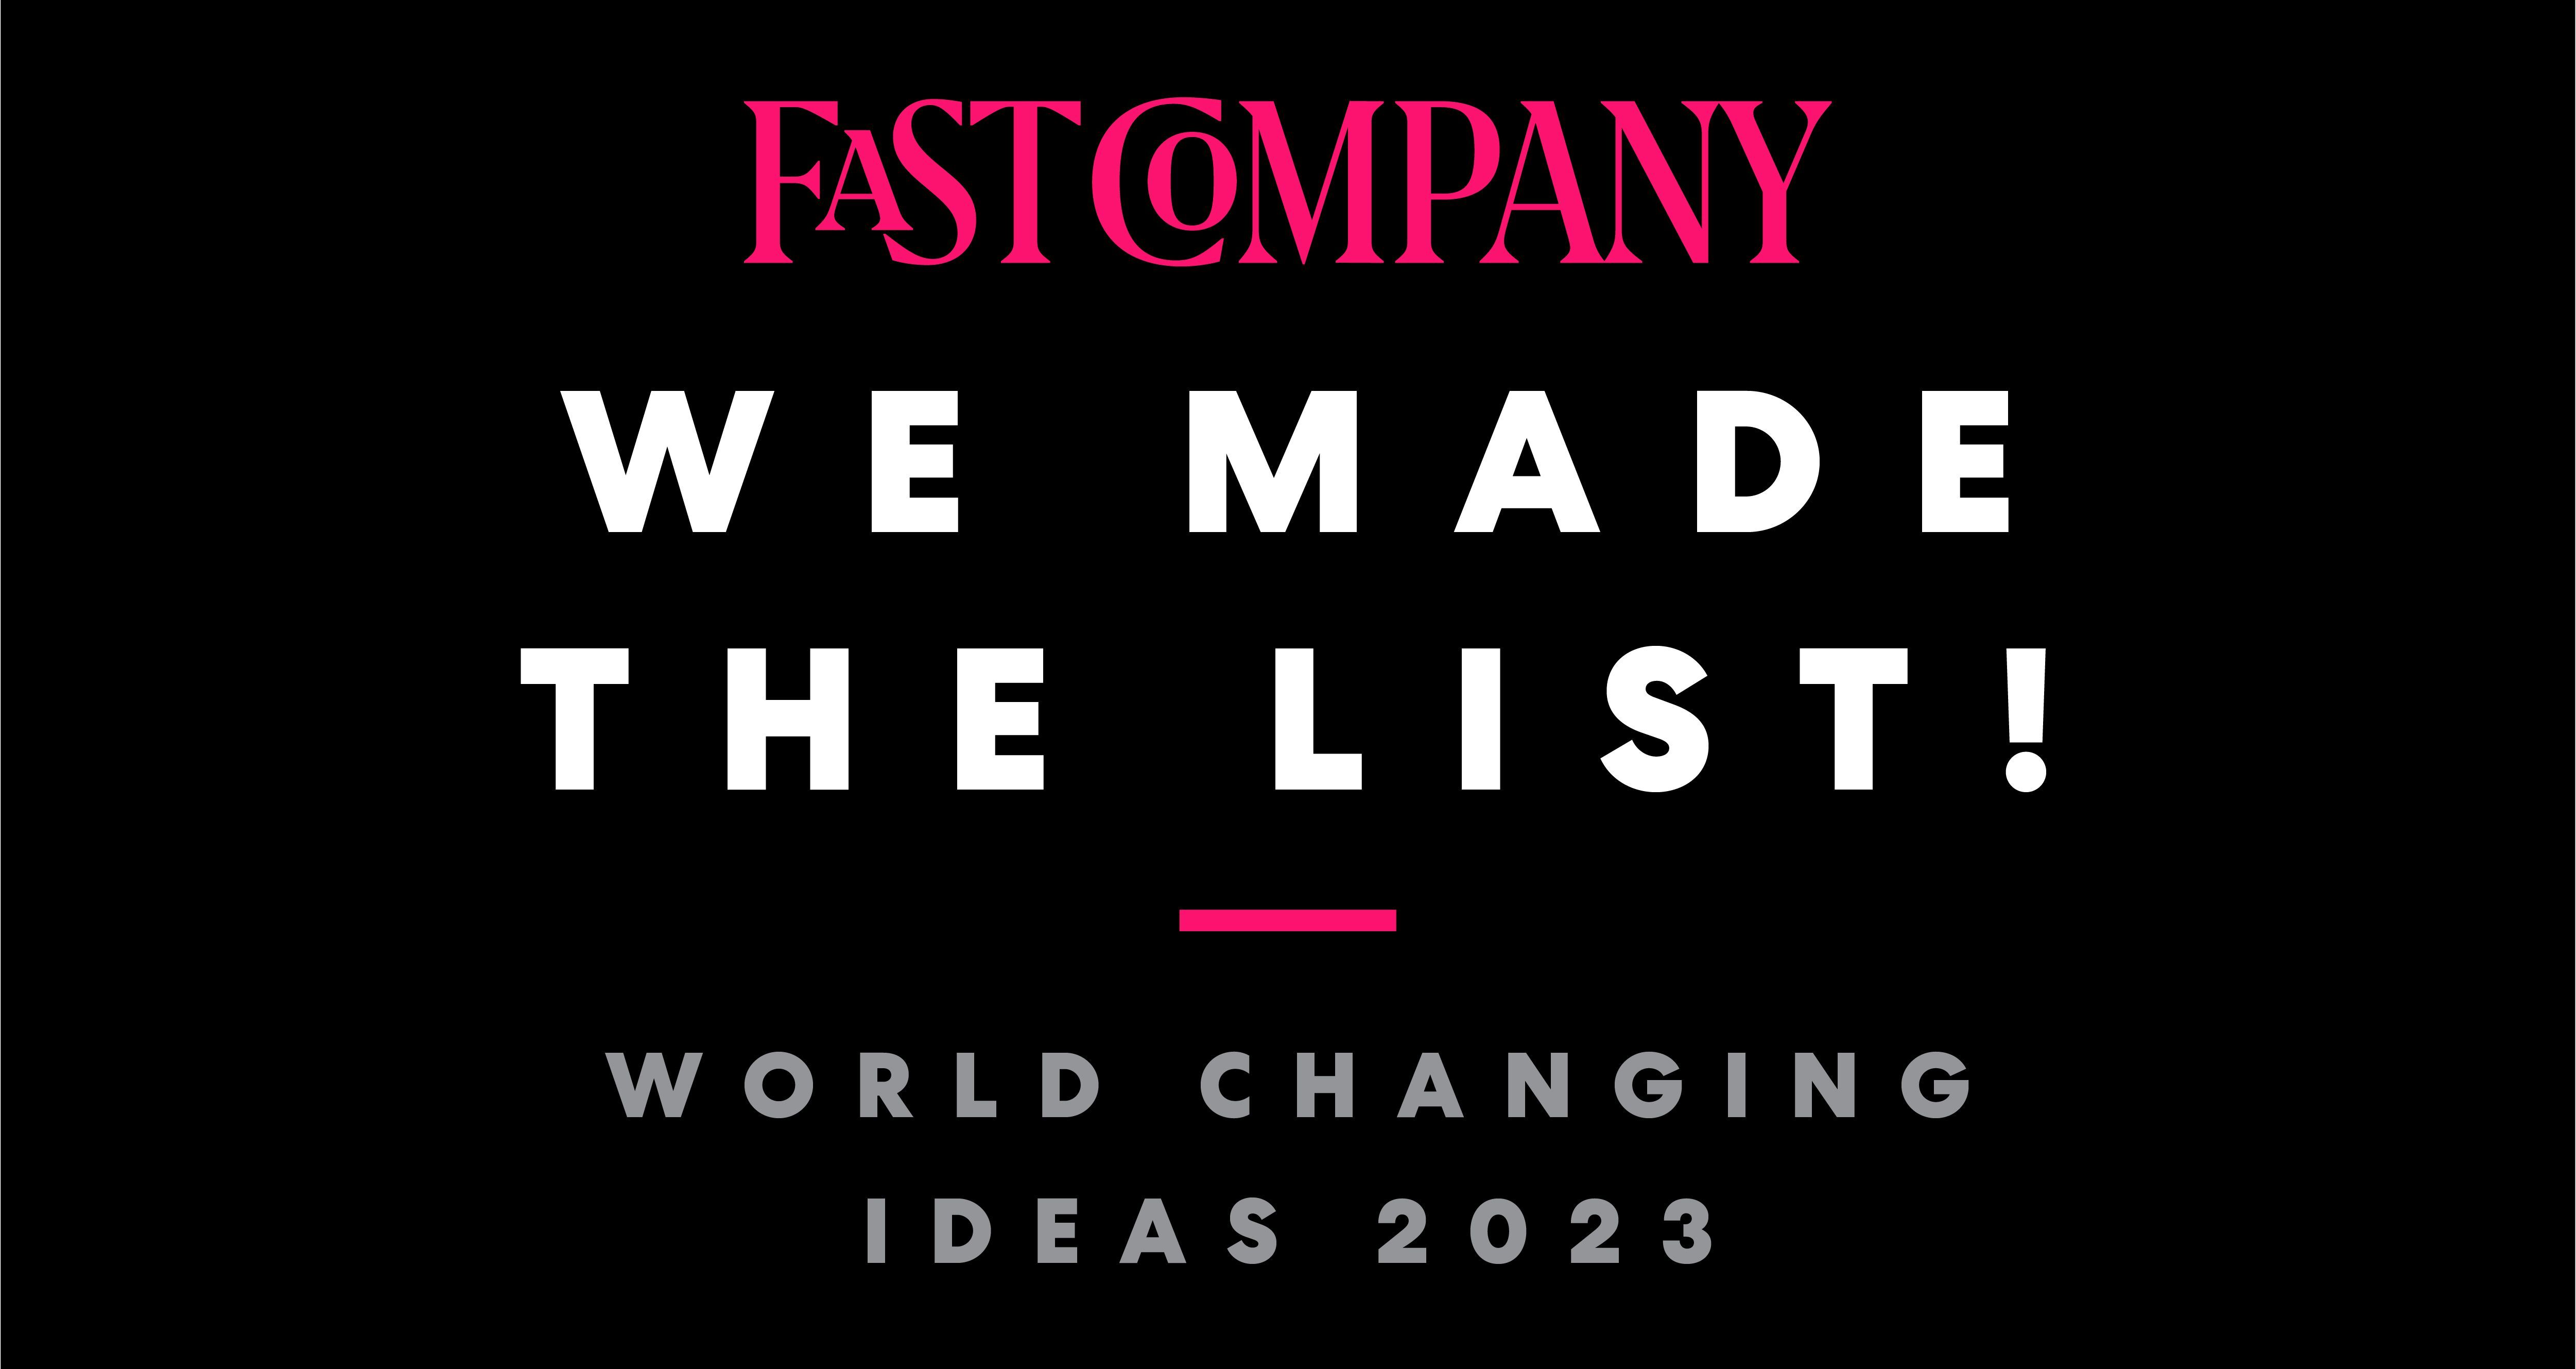 HopSkipDrive’s RideIQ Strategic Routing recognized as a “World Changing Idea” by Fast Company